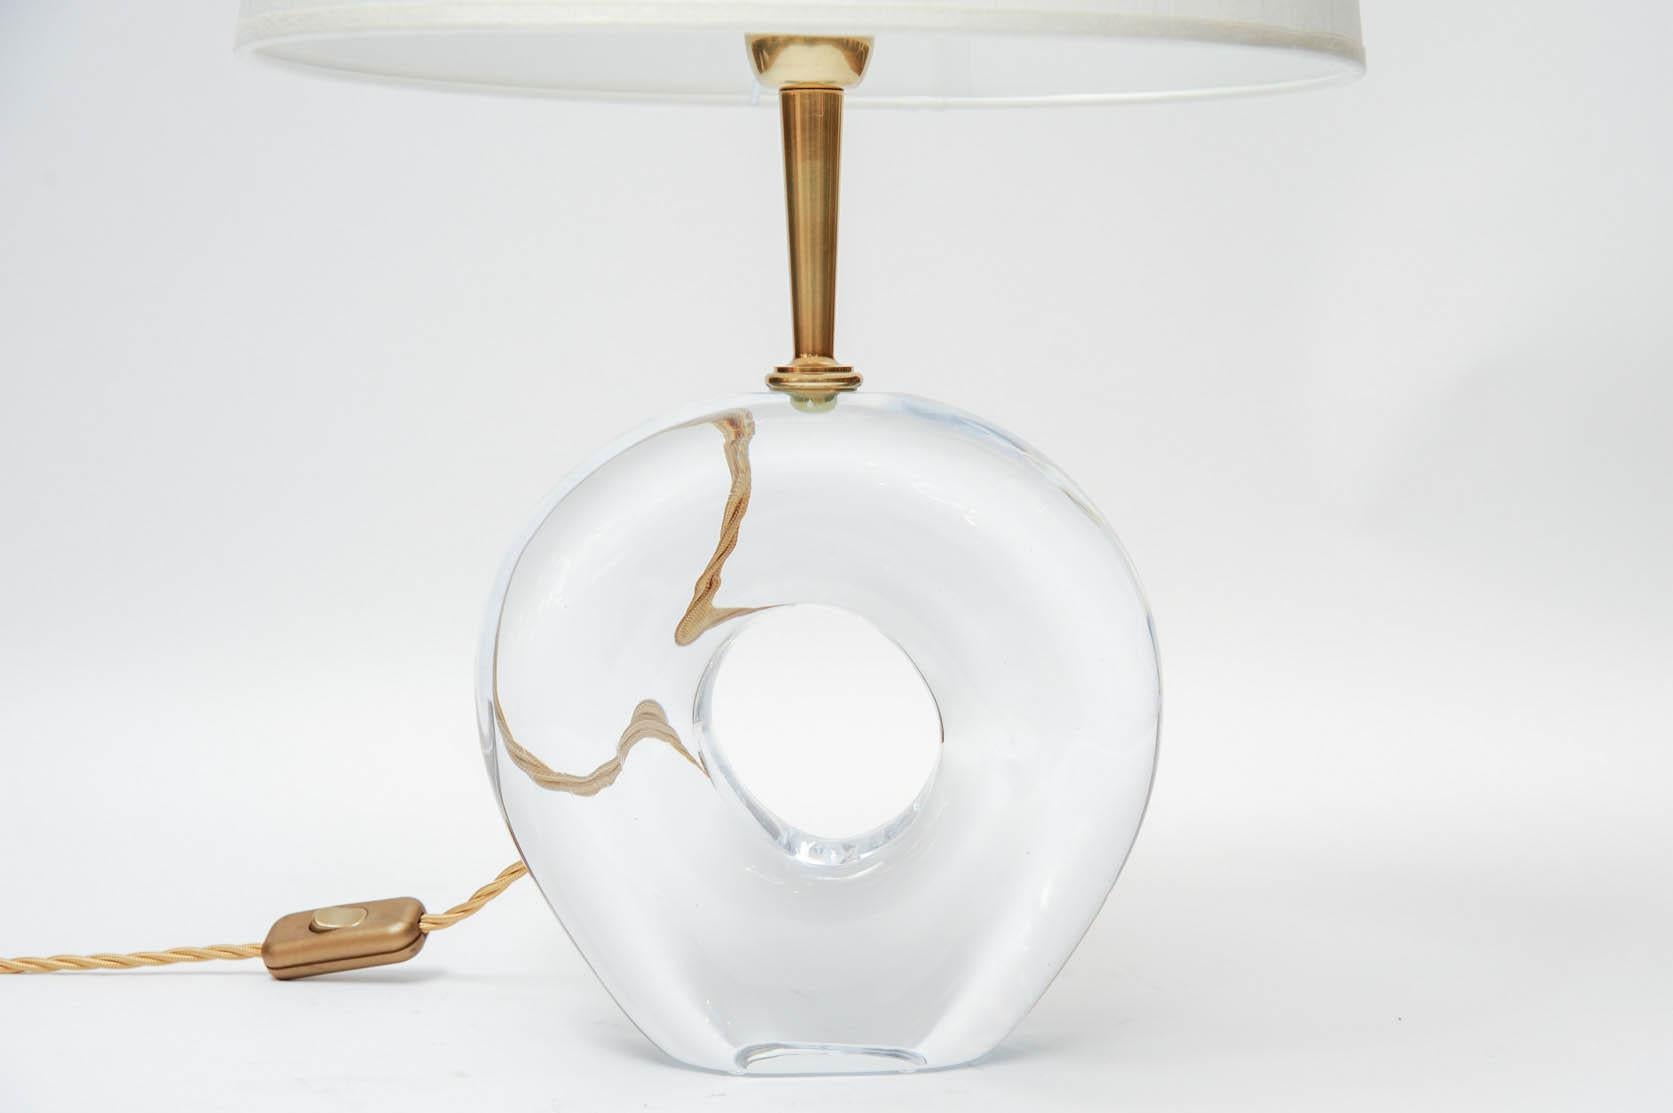 Modern Pair of Unique Table Lamps in Murano Glass by Esperia for Glustin Luminaires